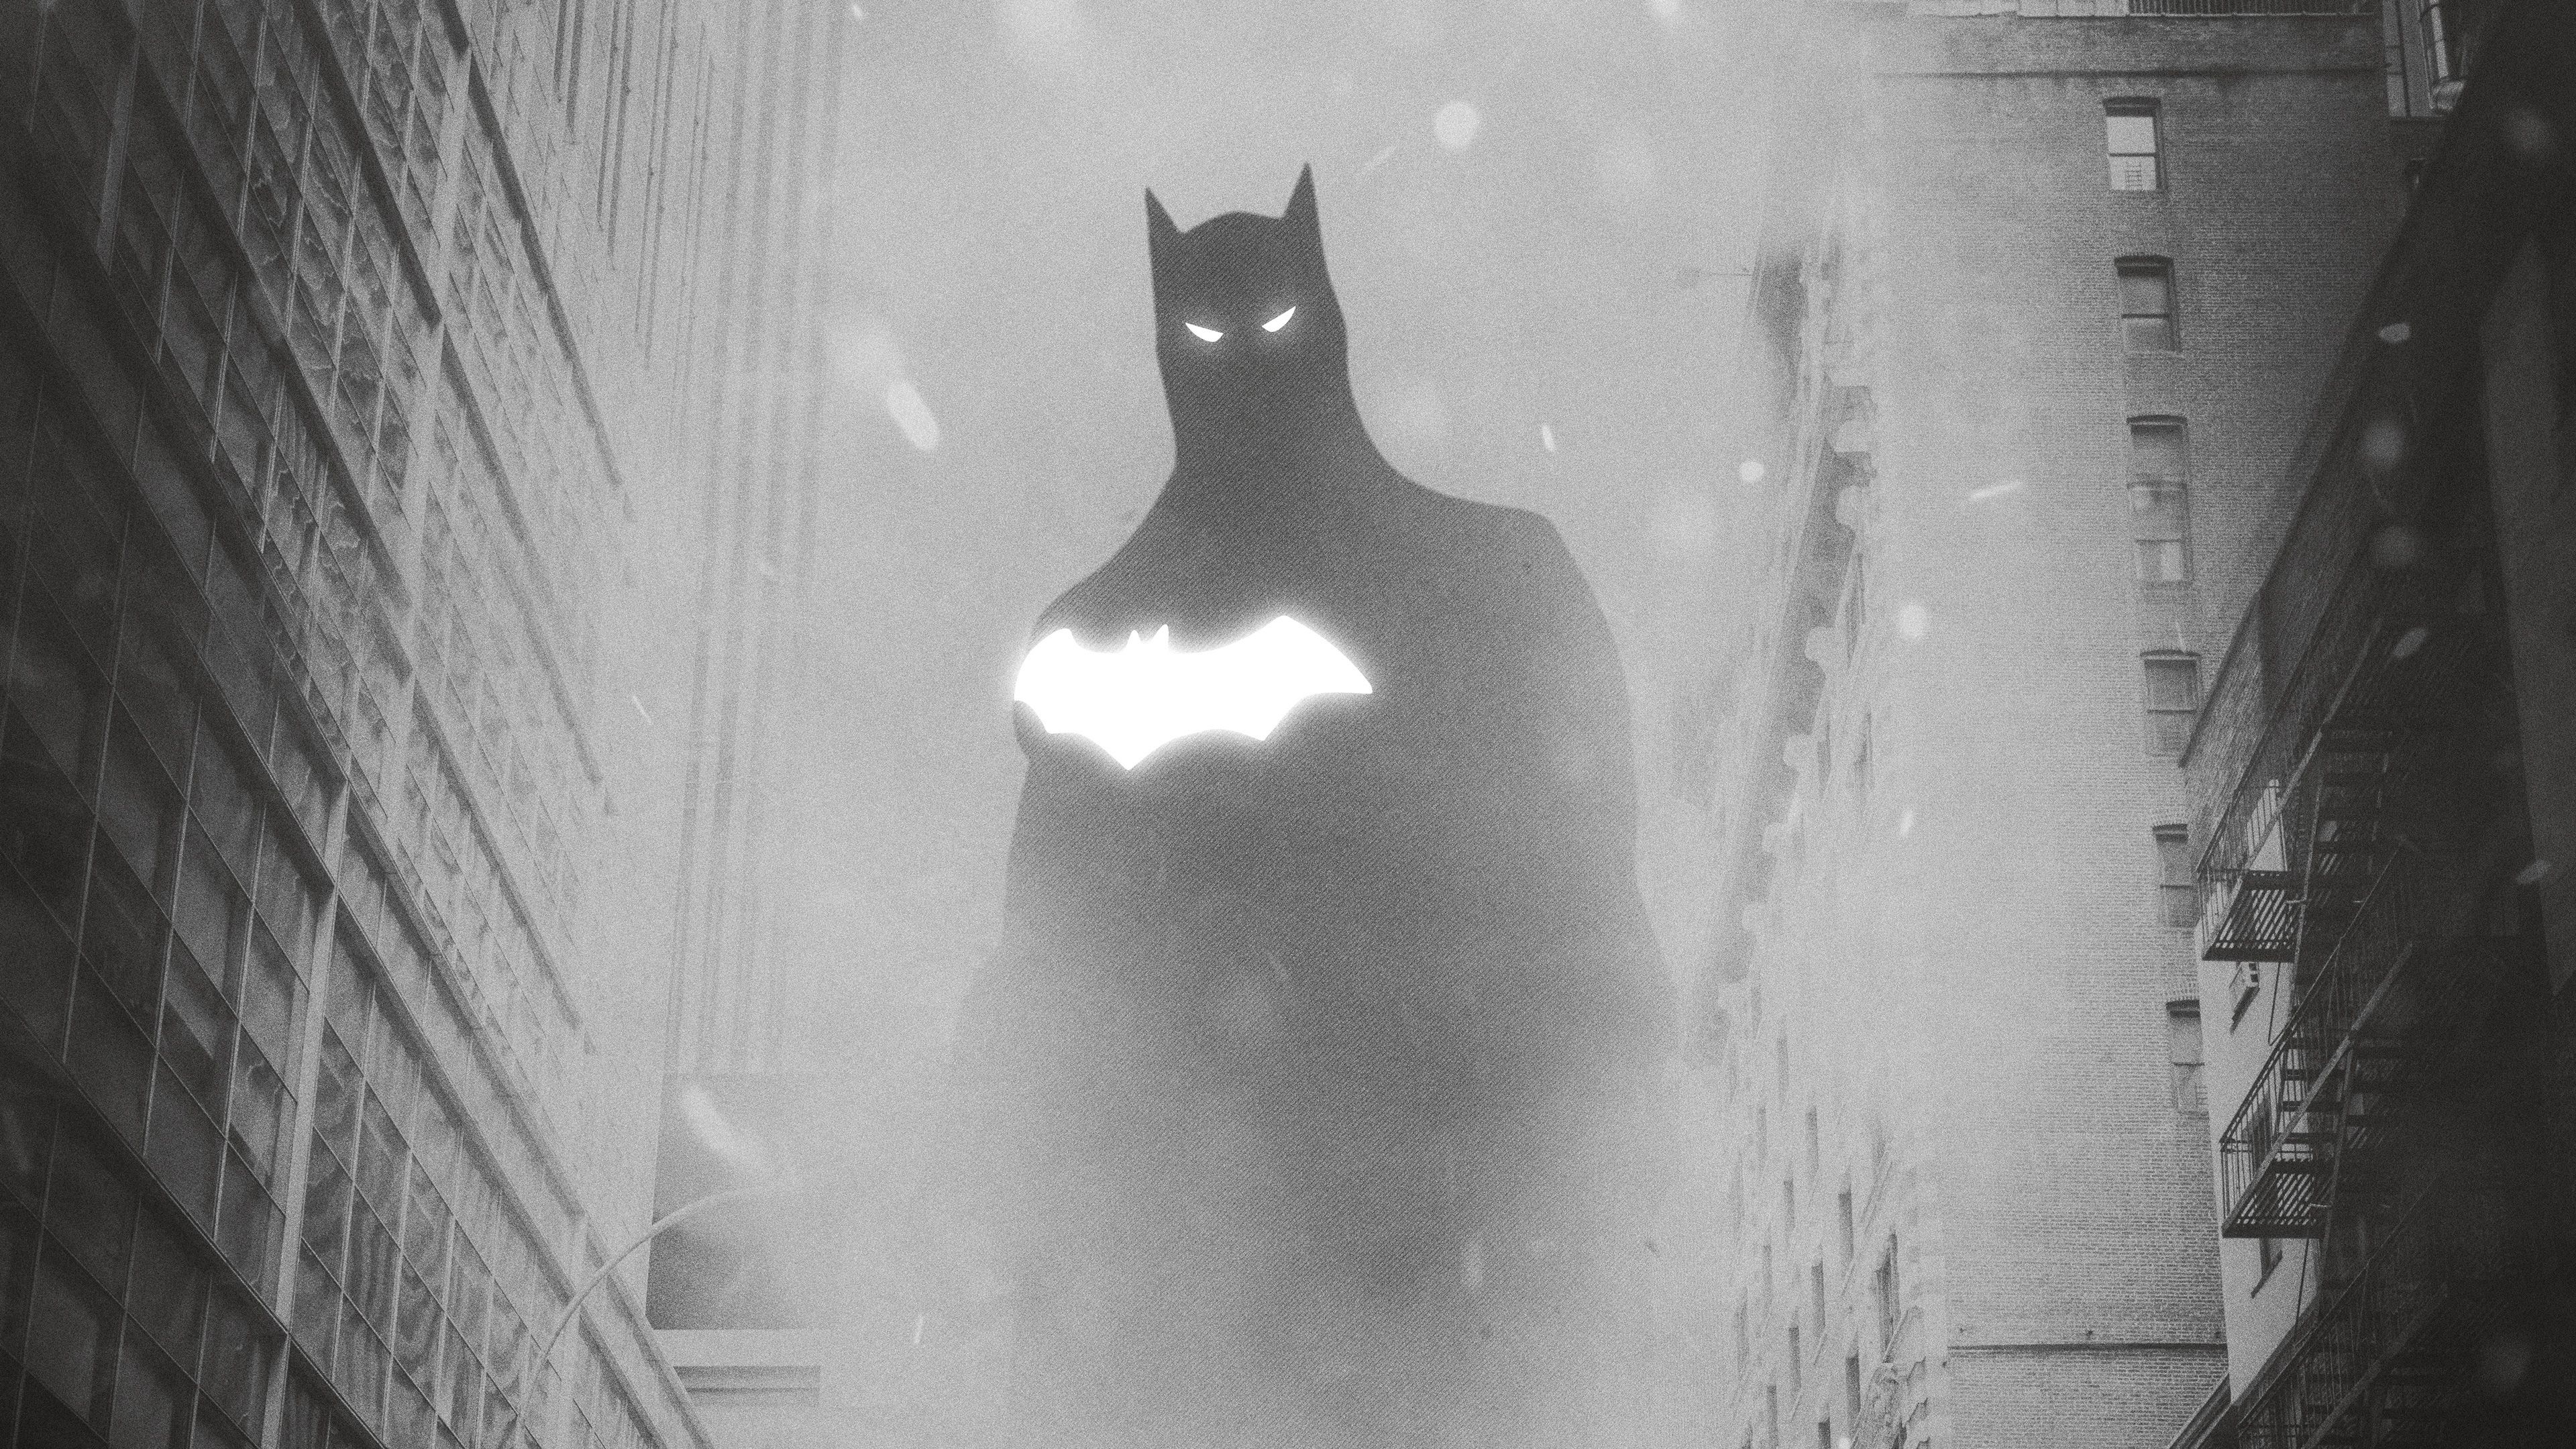 wallpapers hd superheroes,batman,black and white,whiskers,fictional character,snapshot,justice league,eye,cat,monochrome photography,superhero,